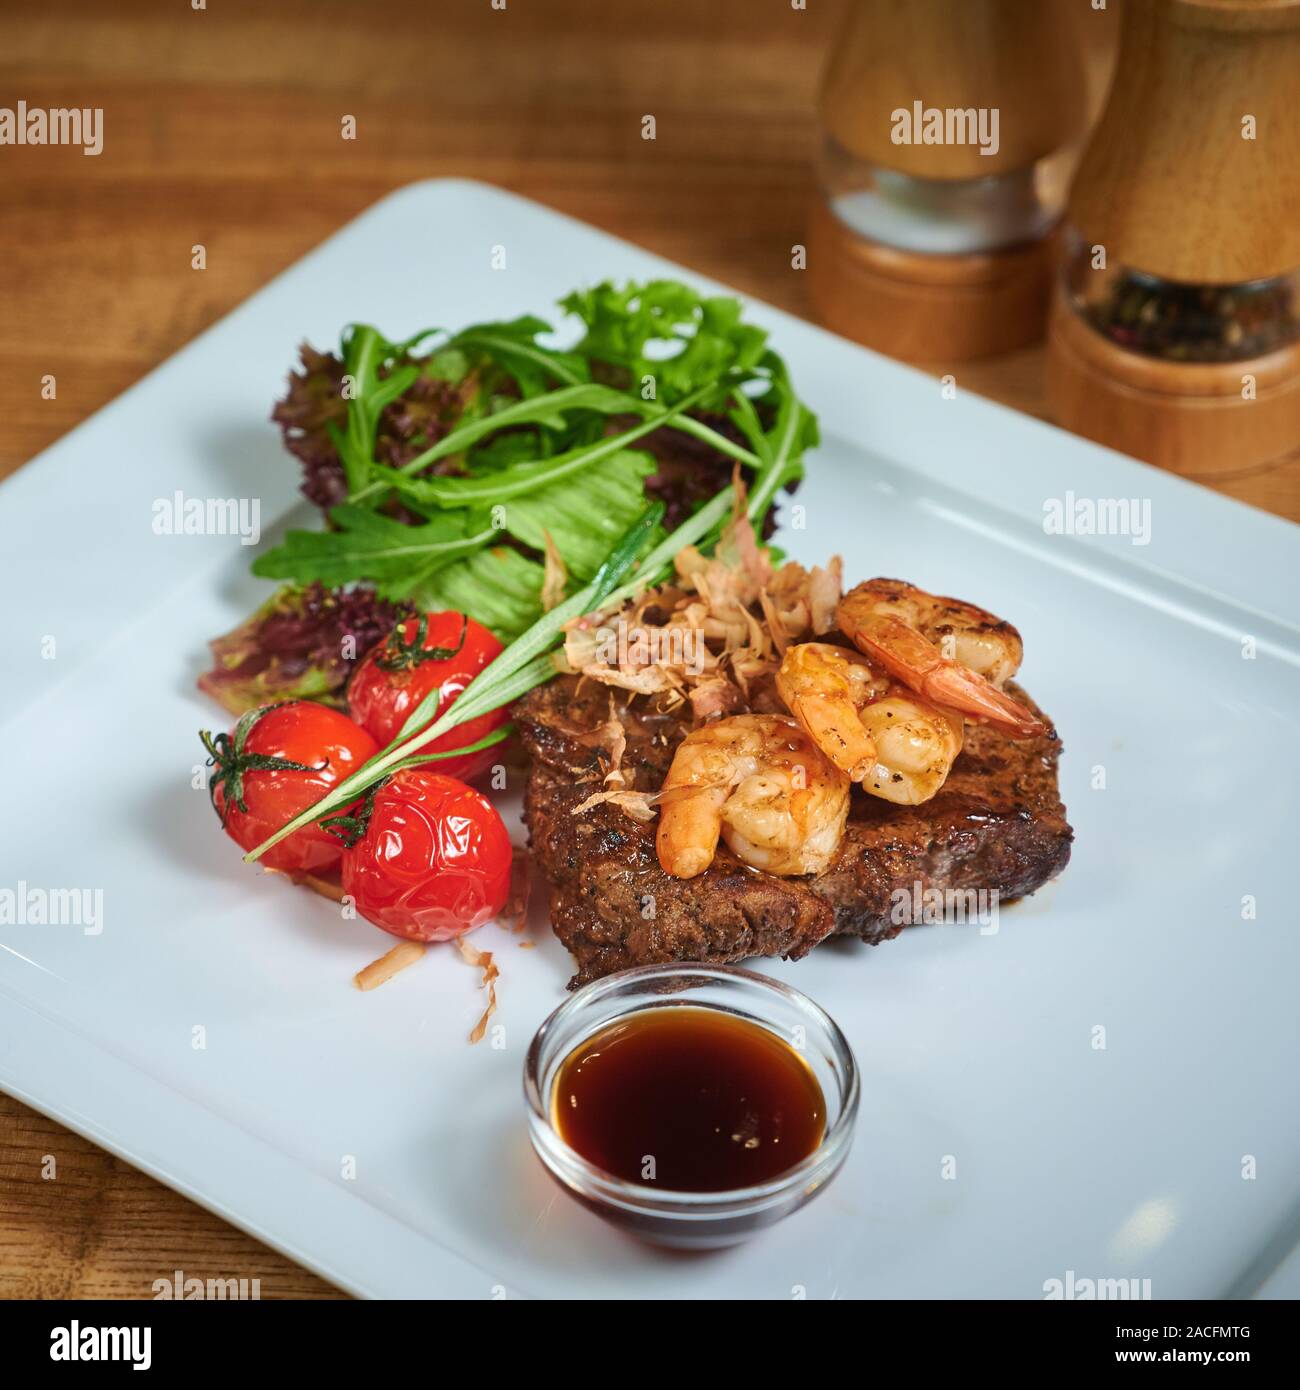 Dish of meat on a plate adding with shrimp, tomatoes and salad. Grilling steak Stock Photo